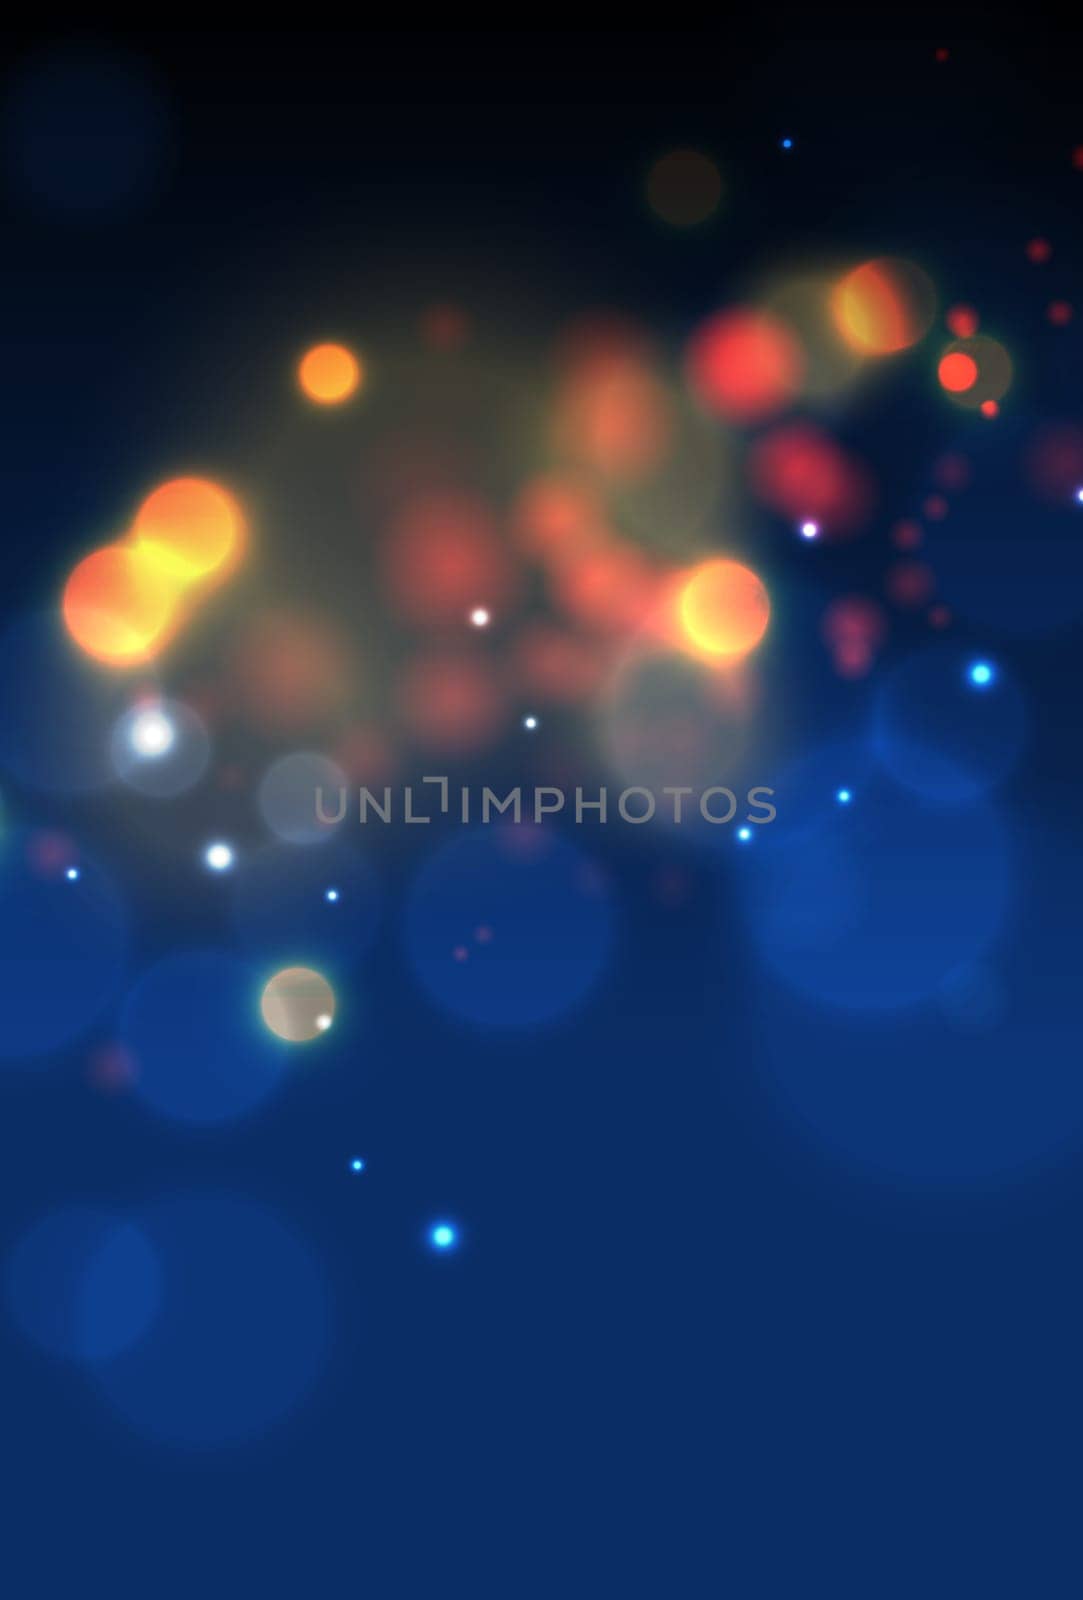 Abstract blue bokeh background with defocused circles and glitter. Decoration element for Christmas and New Year holidays, greeting cards, web banners, posters - illustration